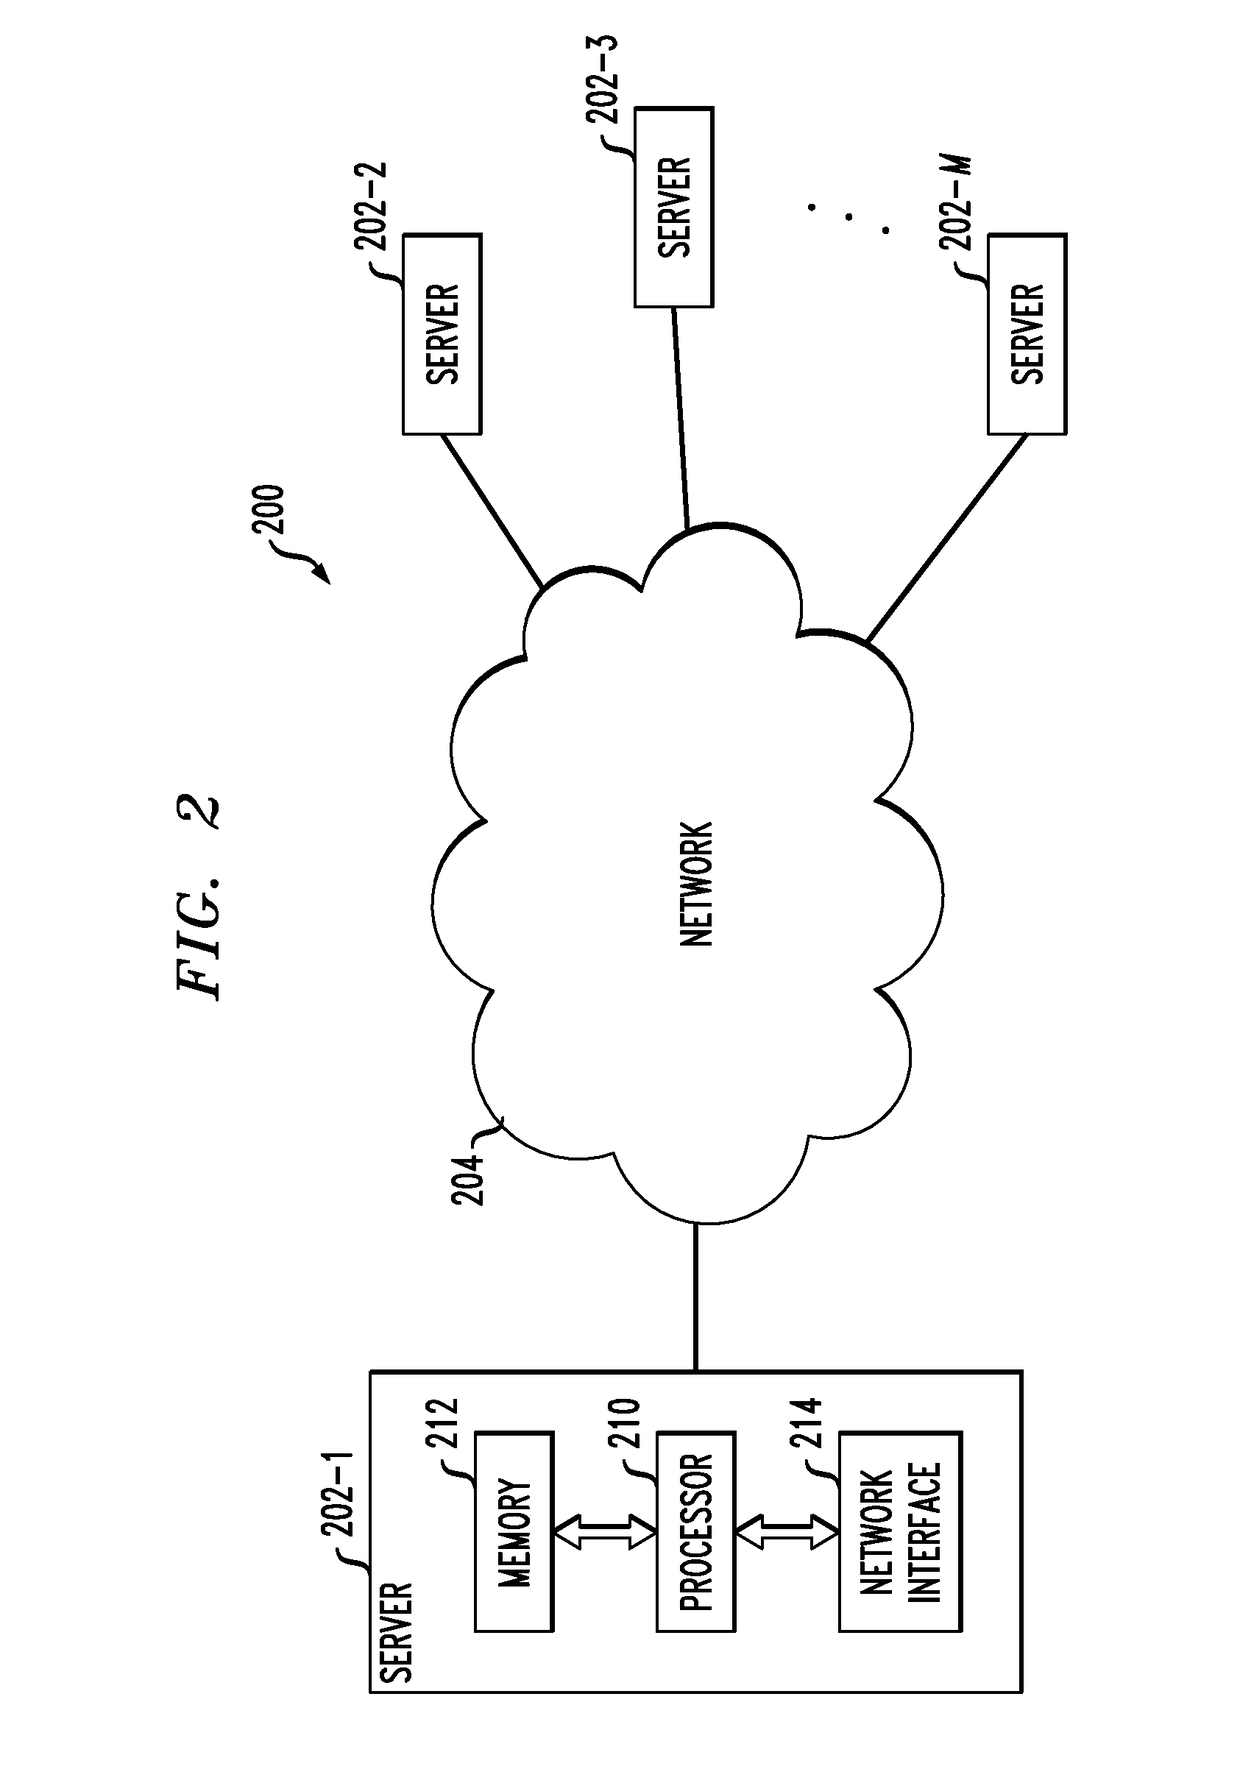 Distributed security information and event management system with application-injected remote components